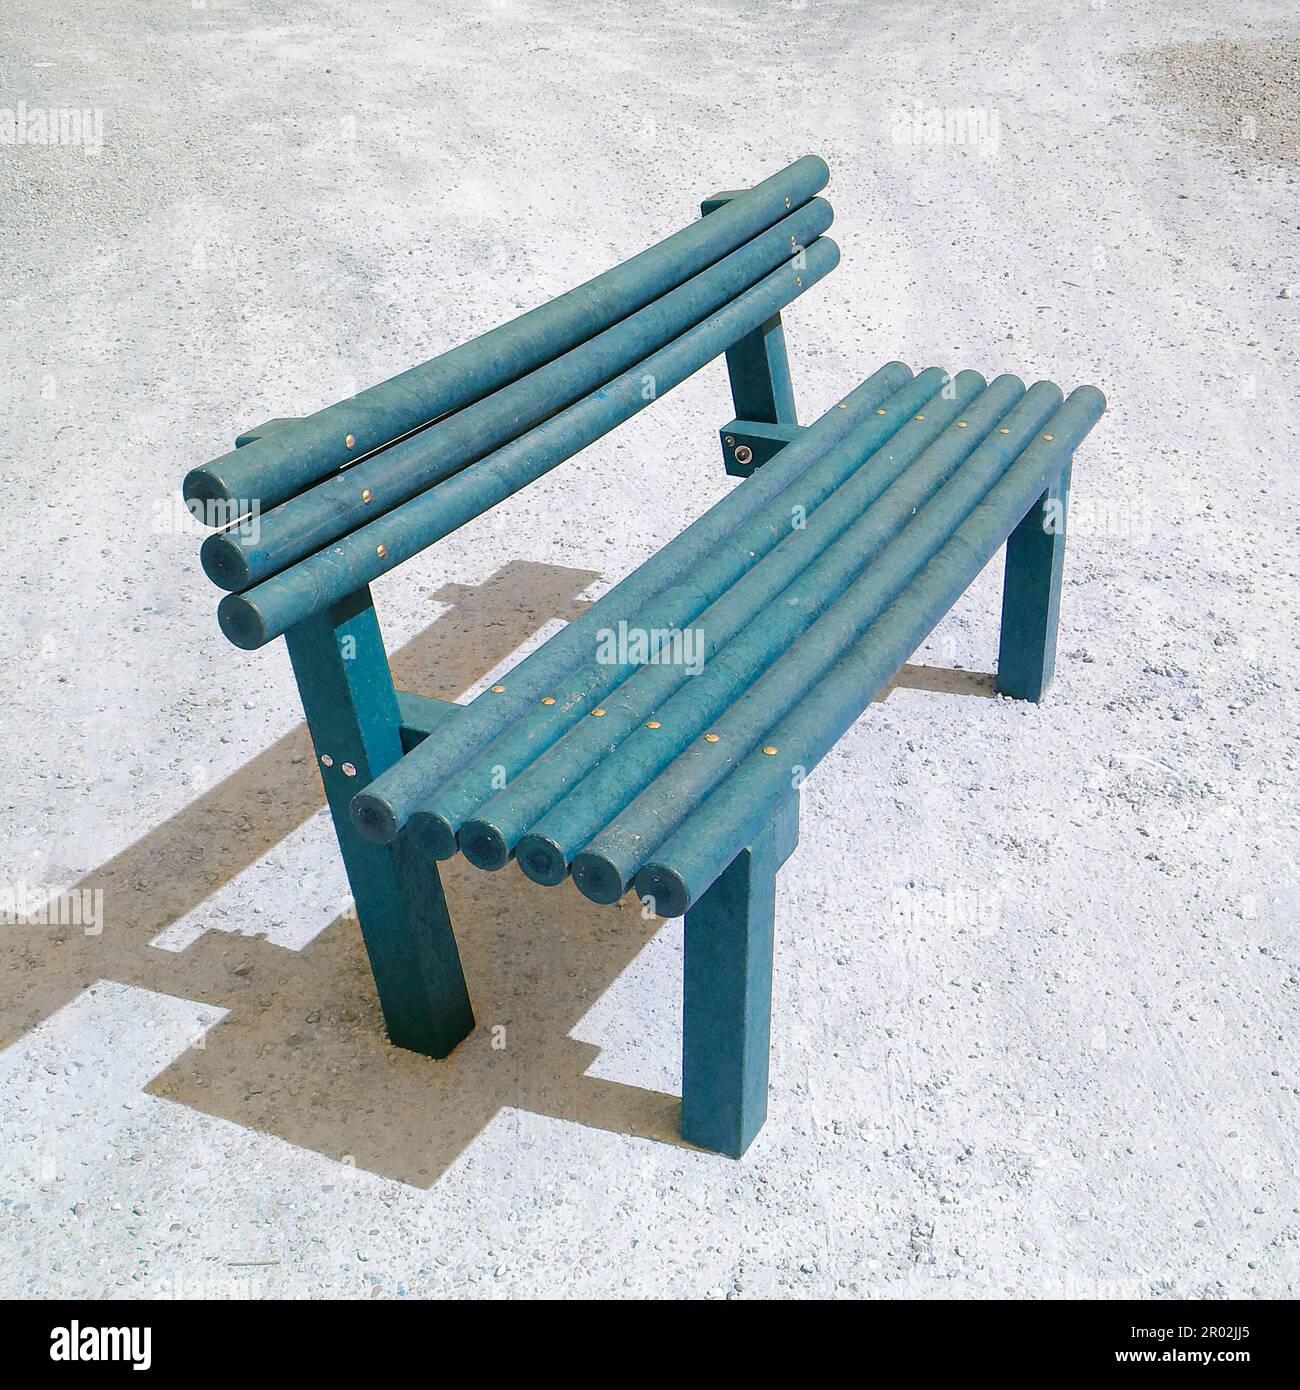 Furniture for outdoor spaces made with recycled plastic material Stock Photo